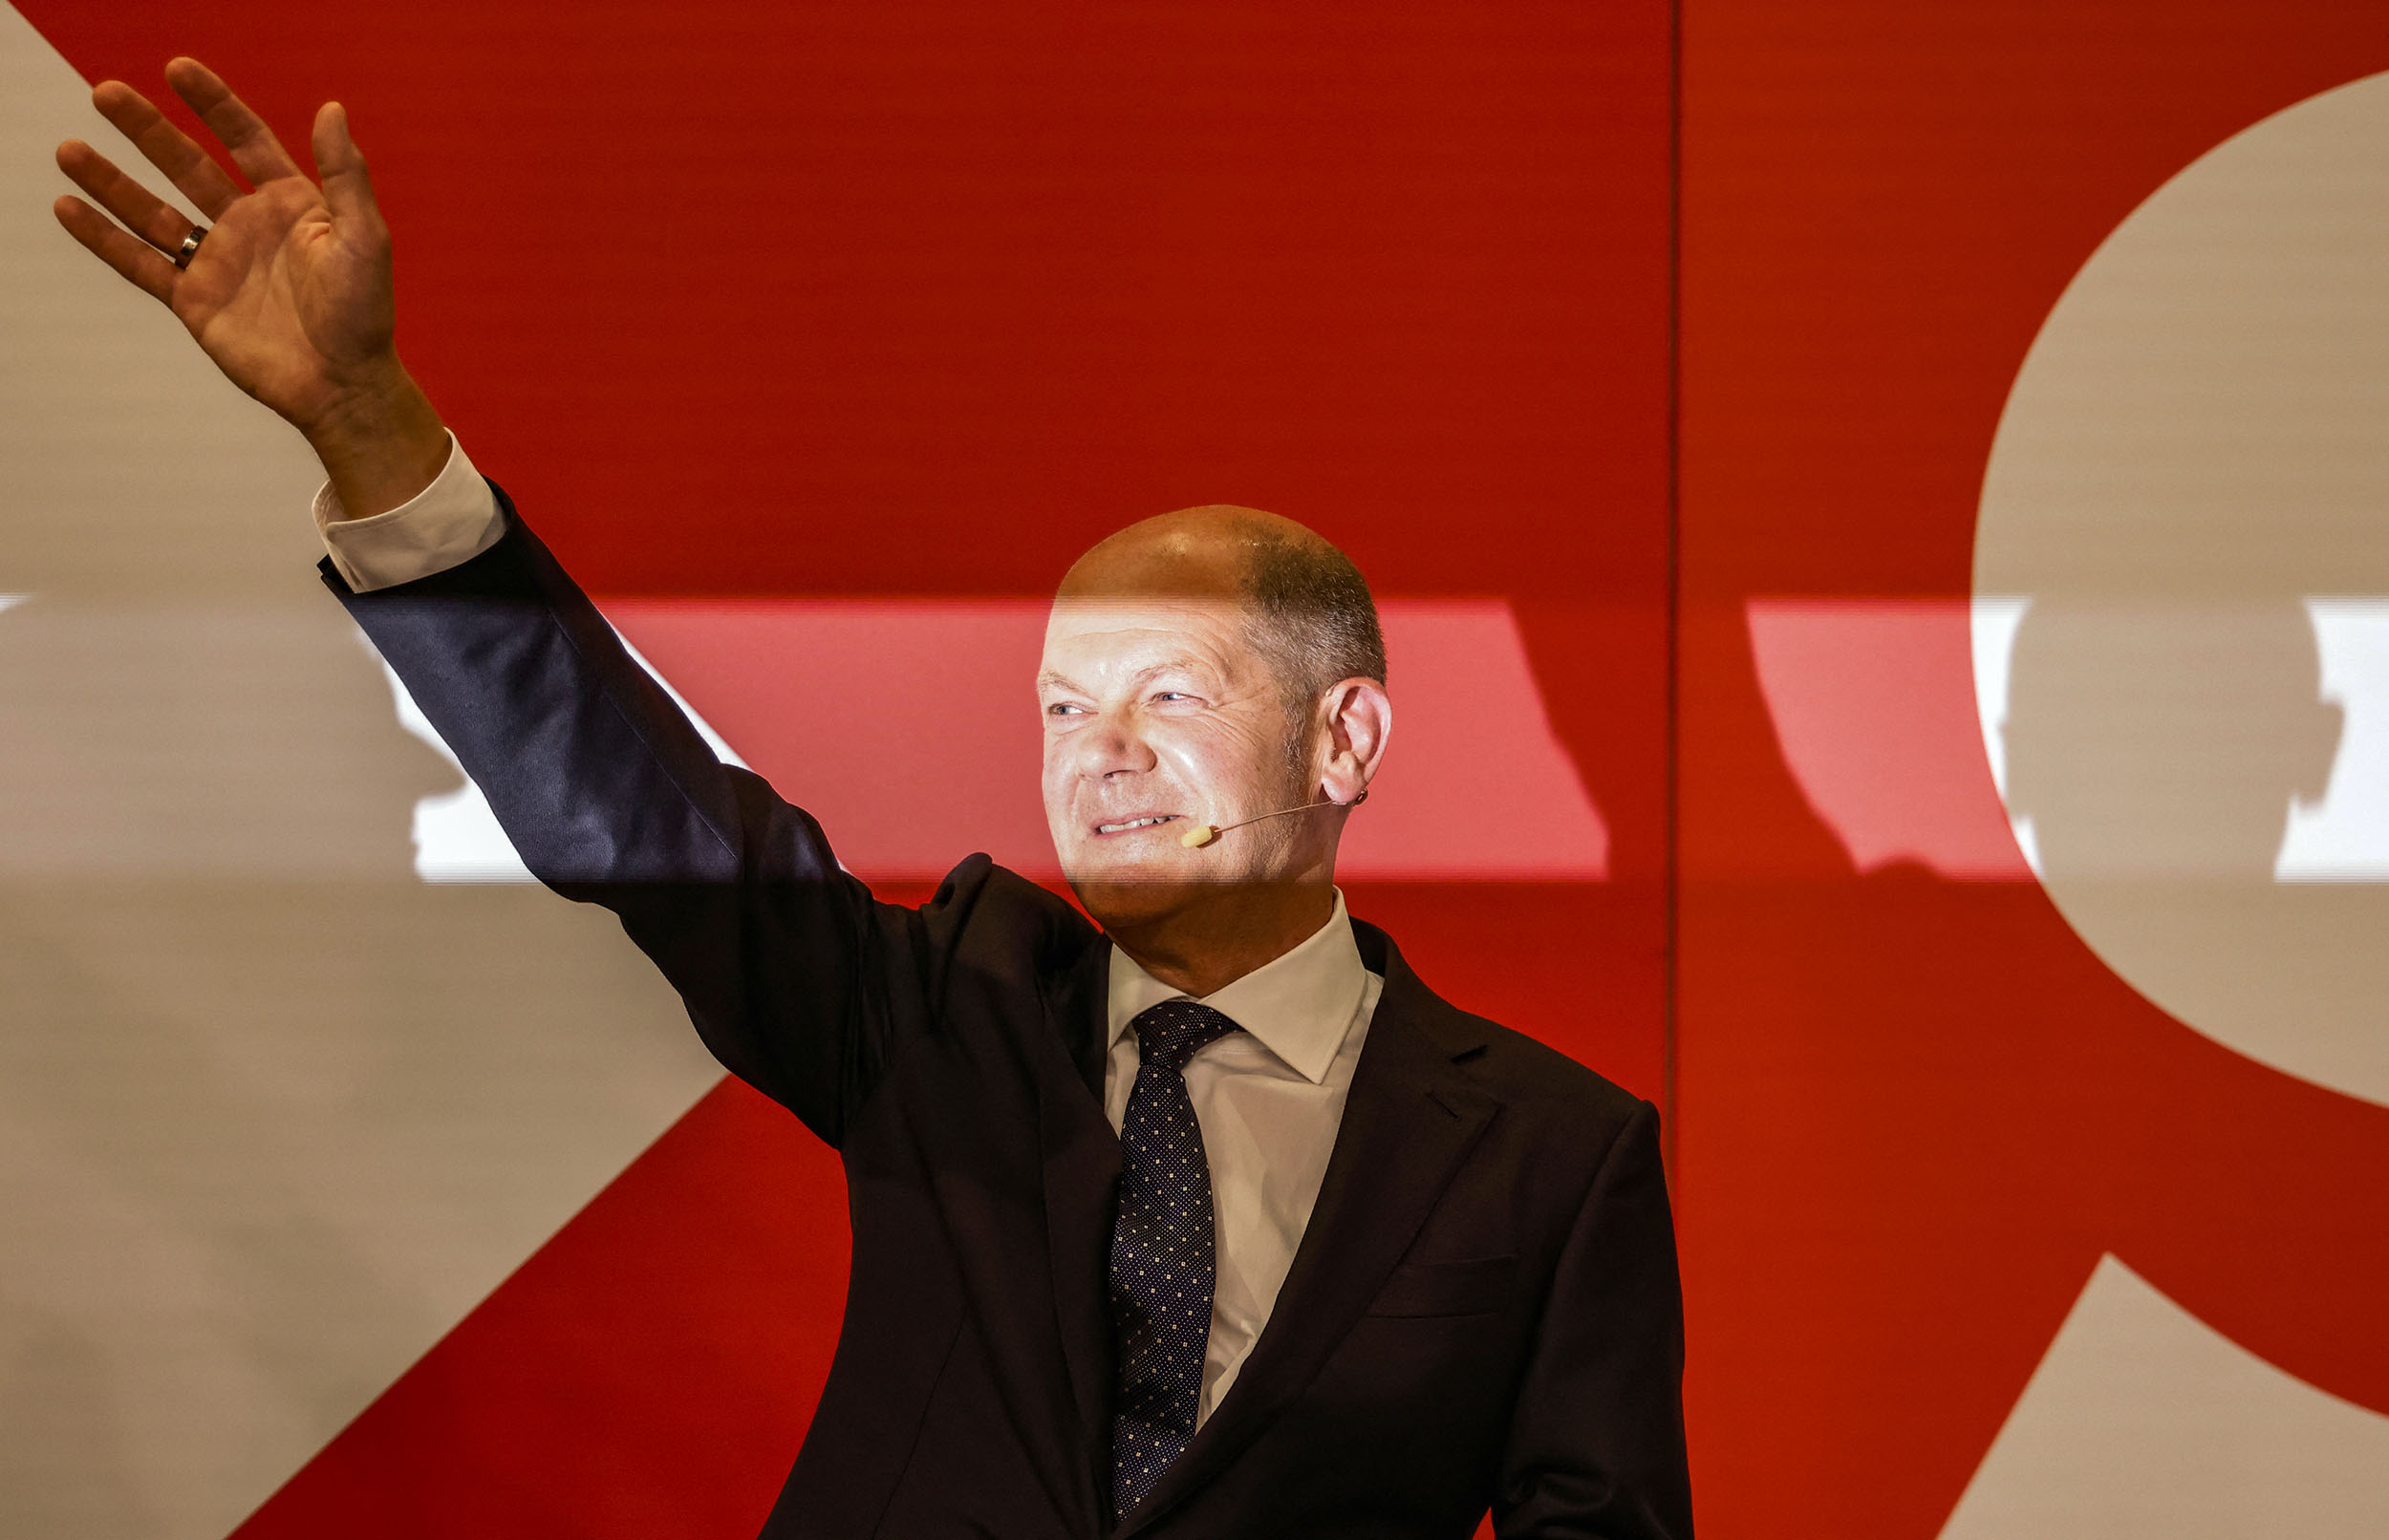 German Finance Minister, Vice-Chancellor and the Social Democrats (SPD) candidate for Chancellor Olaf Scholz waves on stage at the Social Democrats (SPD) headquarters after the estimates were broadcast in Berlin on September 26, 2021 after the German general elections. (Photo by Odd ANDERSEN / AFP)